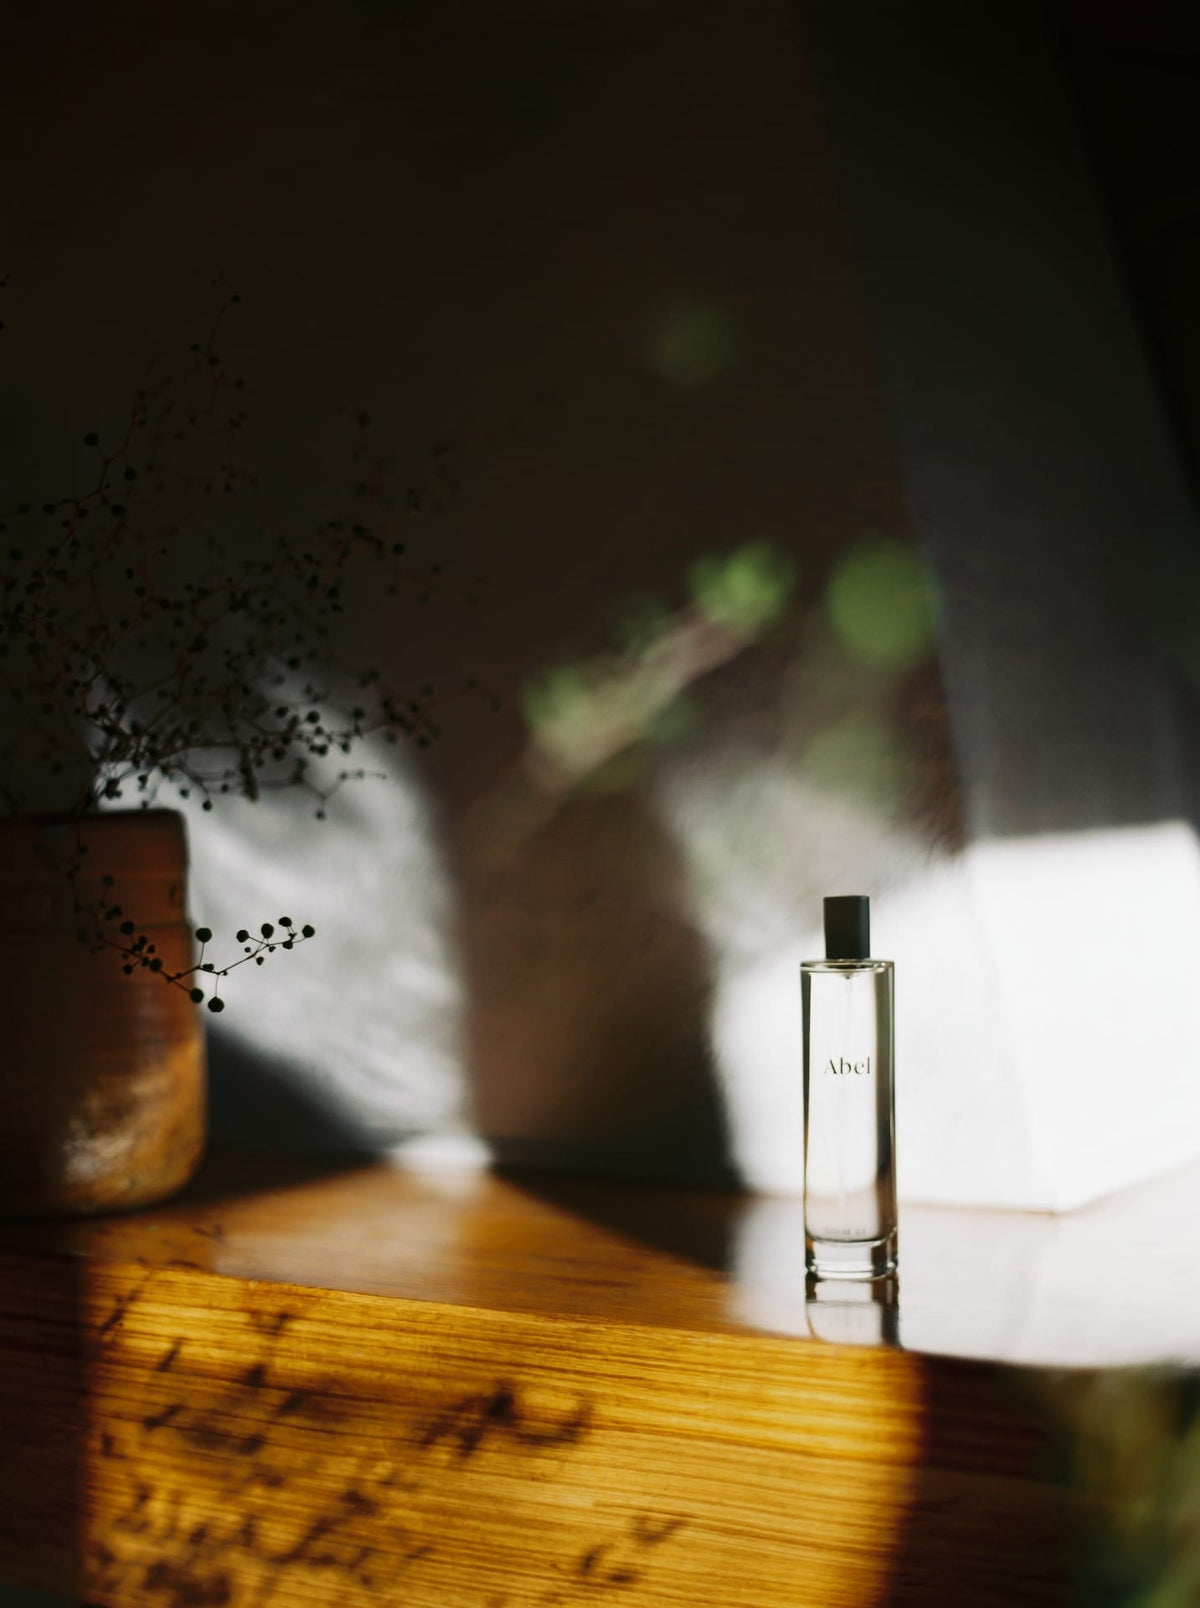 A bottle of Abel Room Spray – Scene 02 ⋅ fig, marigold, cedarwood on a wooden surface in natural lighting with shadows and a vase with dried flowers in the background.